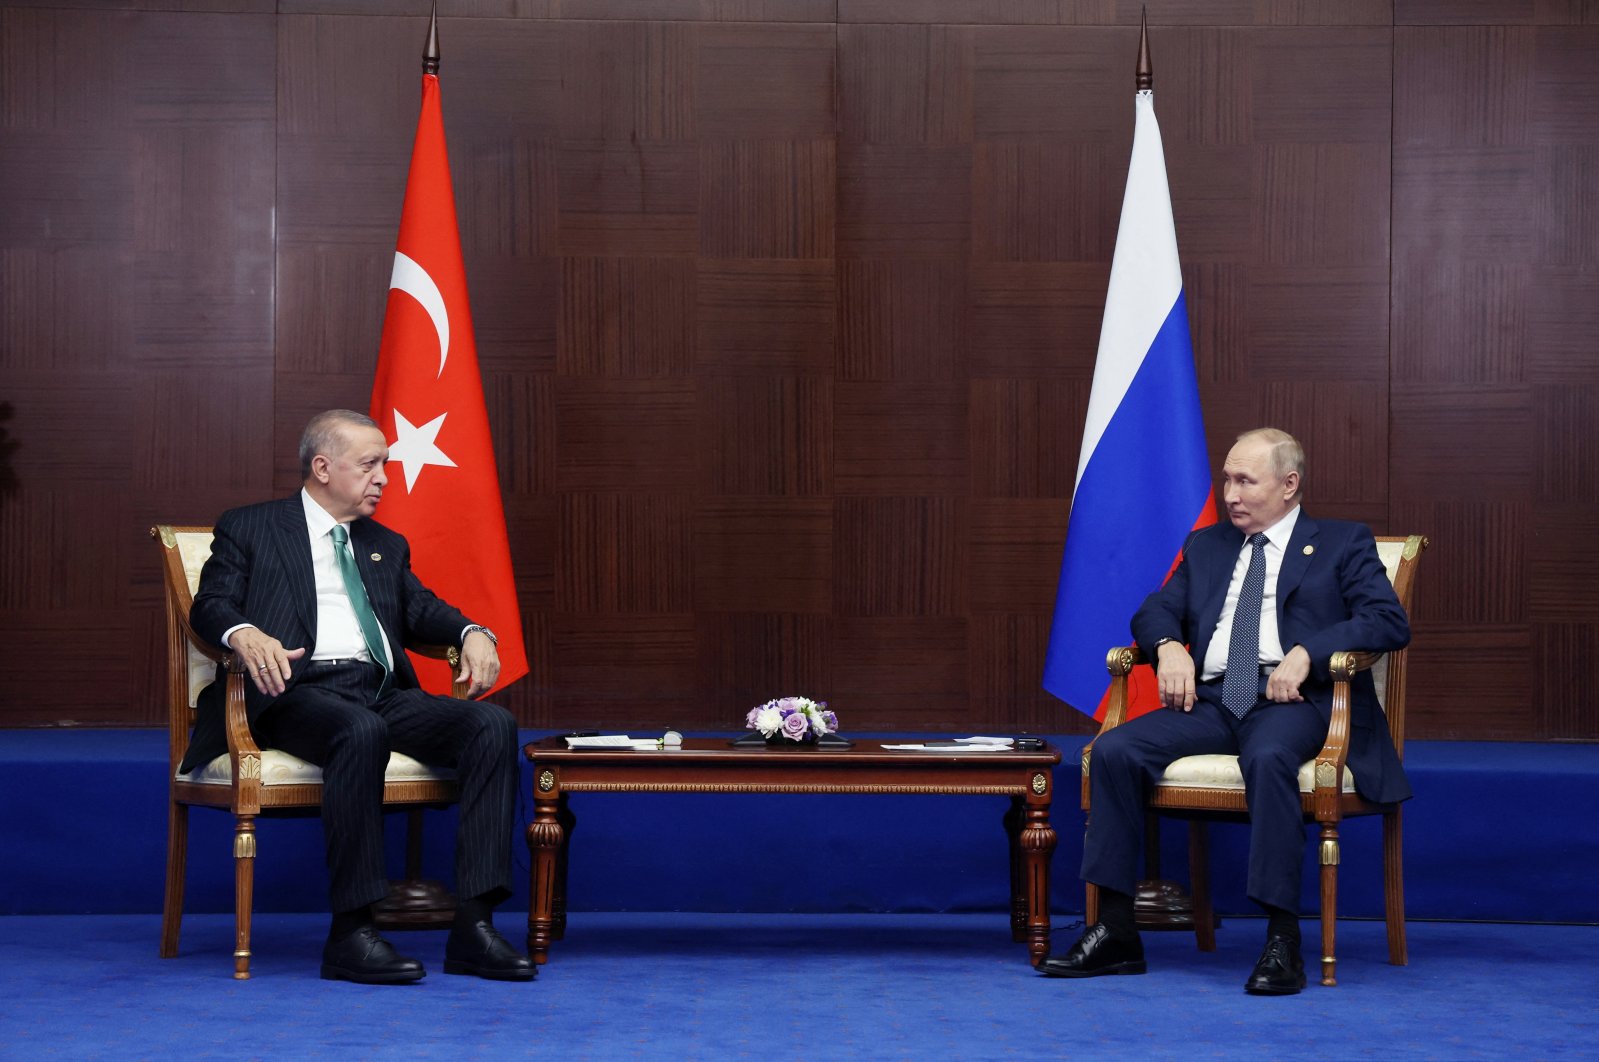 Russia&#039;s President Vladimir Putin and Turkey&#039;s President Tayyip Erdogan meet on the sidelines of the 6th summit of the Conference on Interaction and Confidence-building Measures in Asia (CICA), in Astana, Kazakhstan October 13, 2022.   Sputnik/Vyacheslav Prokofyev/Pool via REUTERS ATTENTION EDITORS - THIS IMAGE WAS PROVIDED BY A THIRD PARTY.